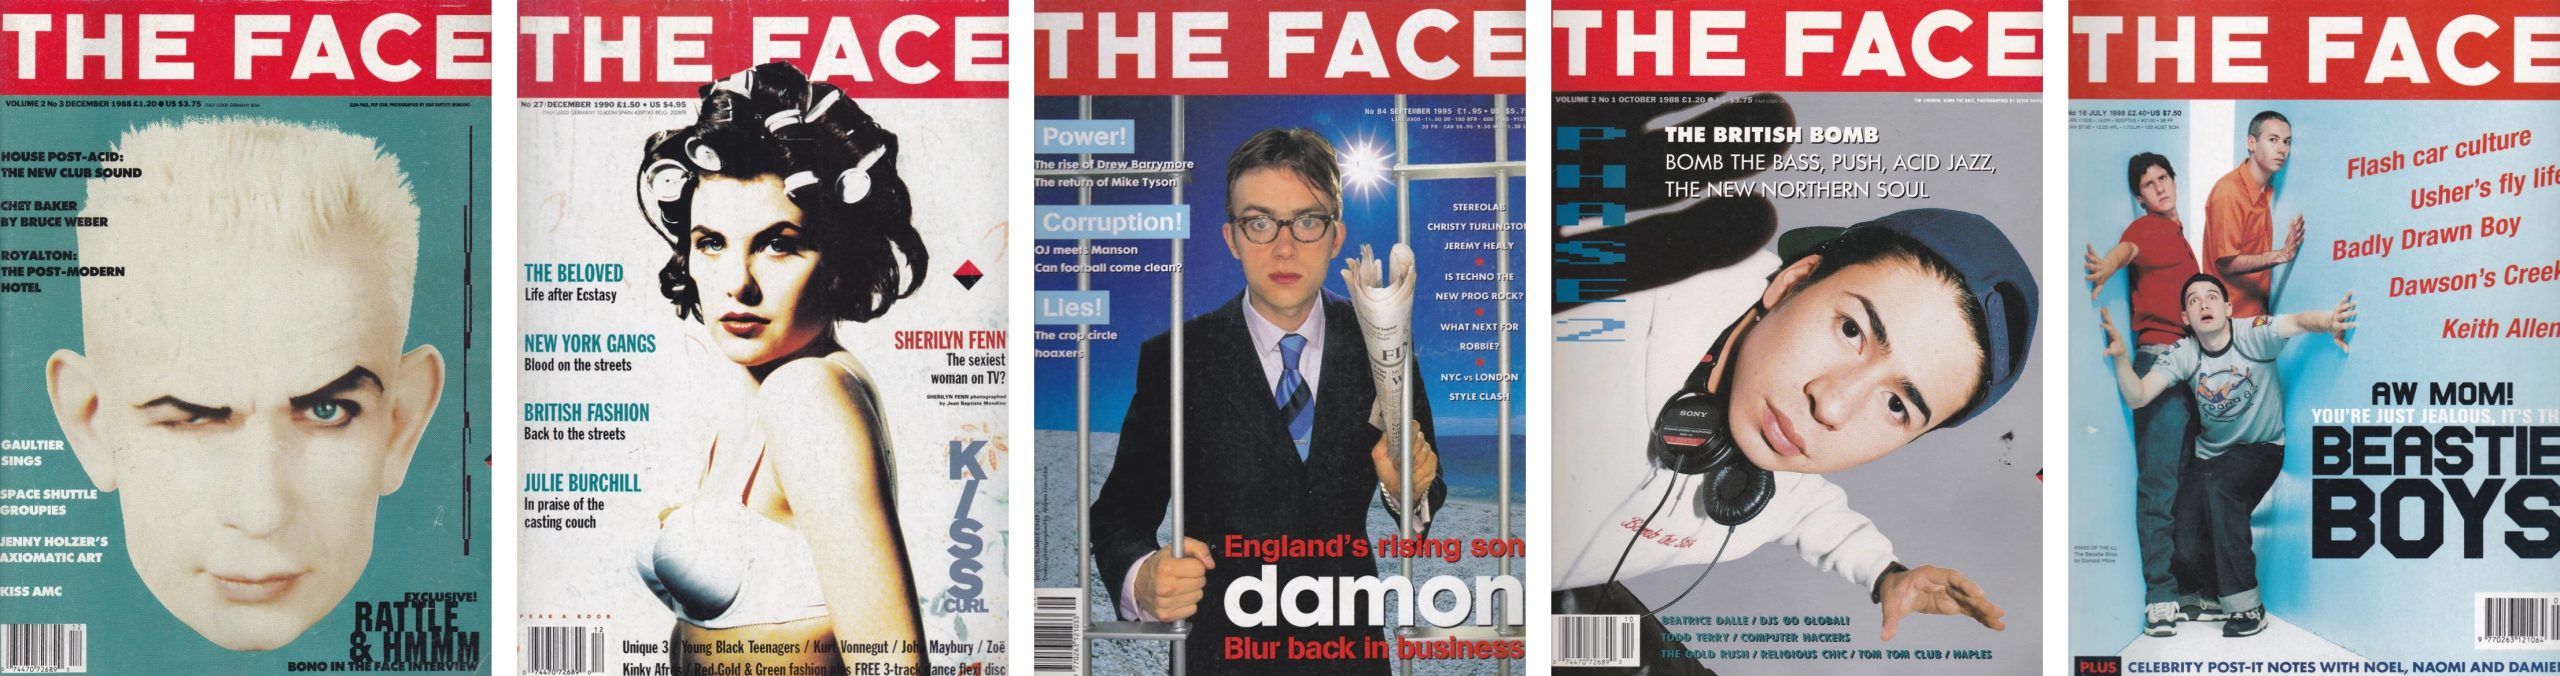 Face Magazine Covers